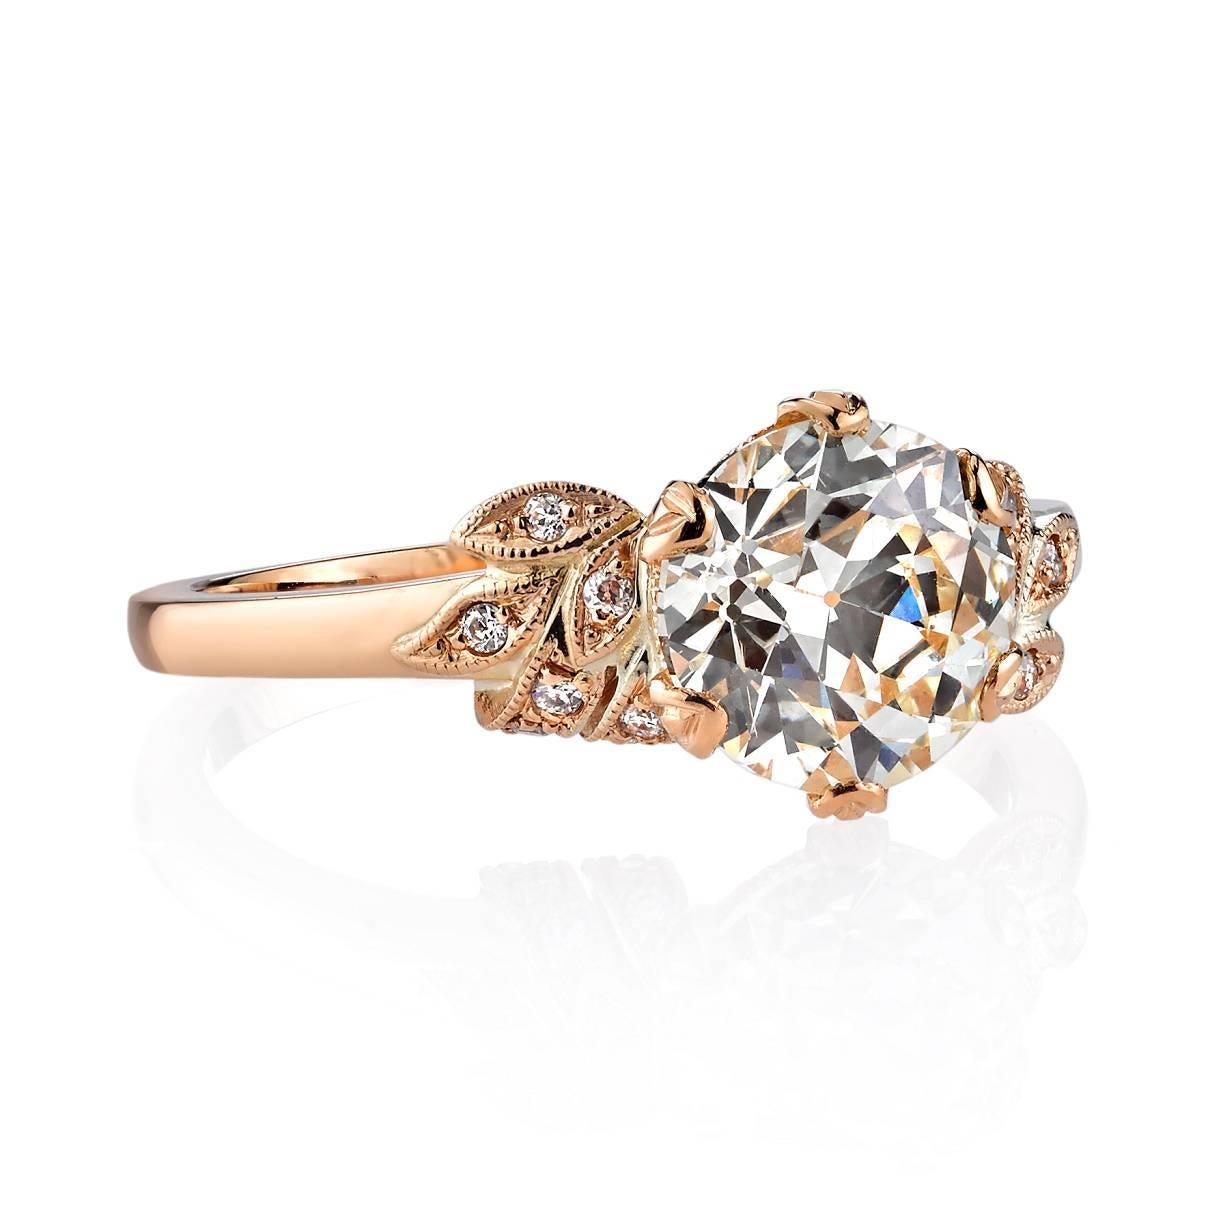 1.84ct L/VS1 EGL certified old European cut diamond set in a handcrafted 18k rose gold mounting. A classic Victorian inspired design featuring floral motifs.